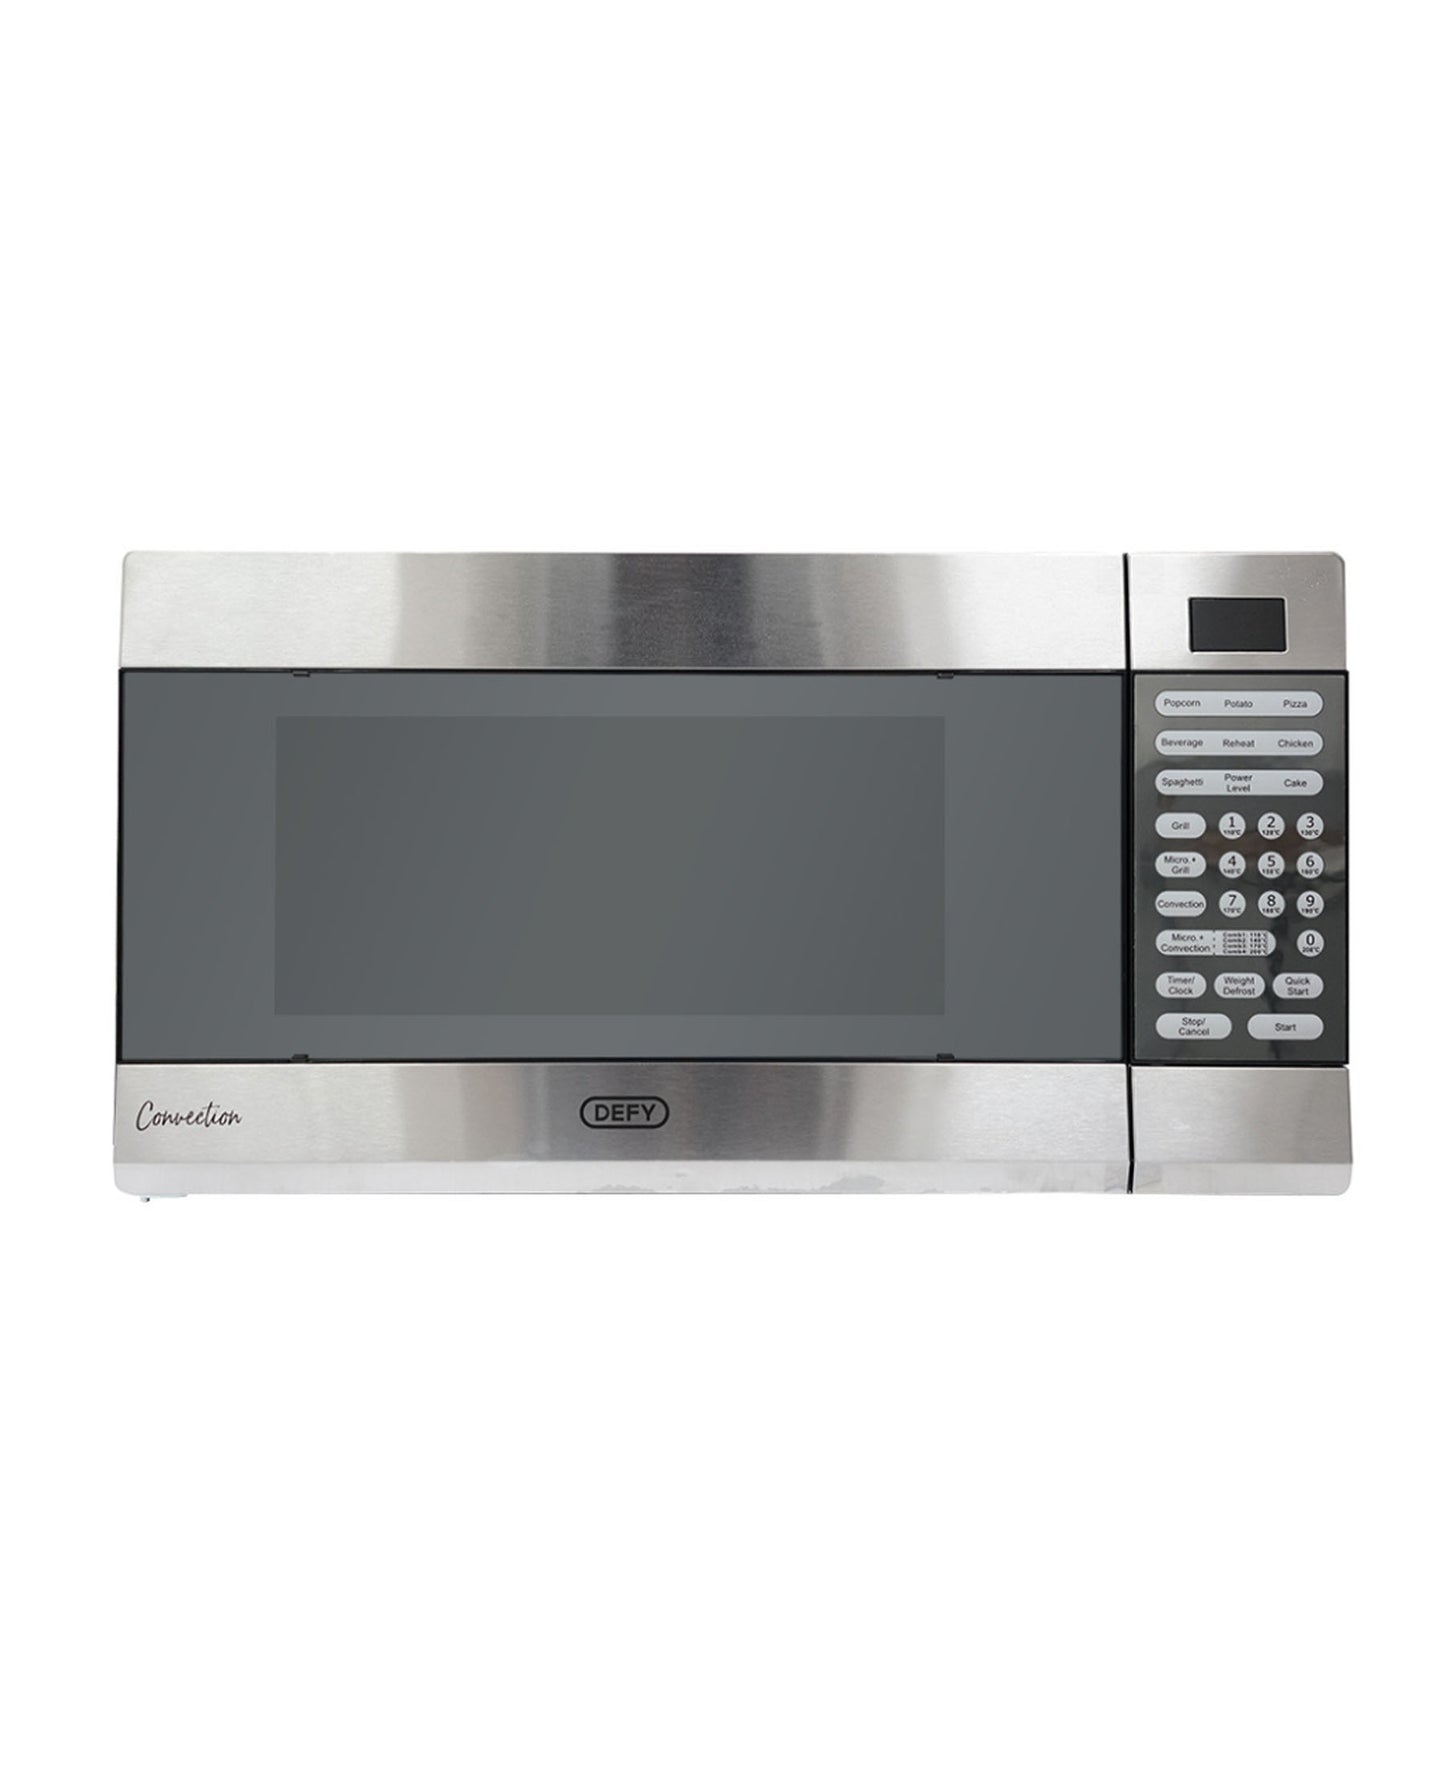 Defy 34L Grill Microwave Oven - DMO392